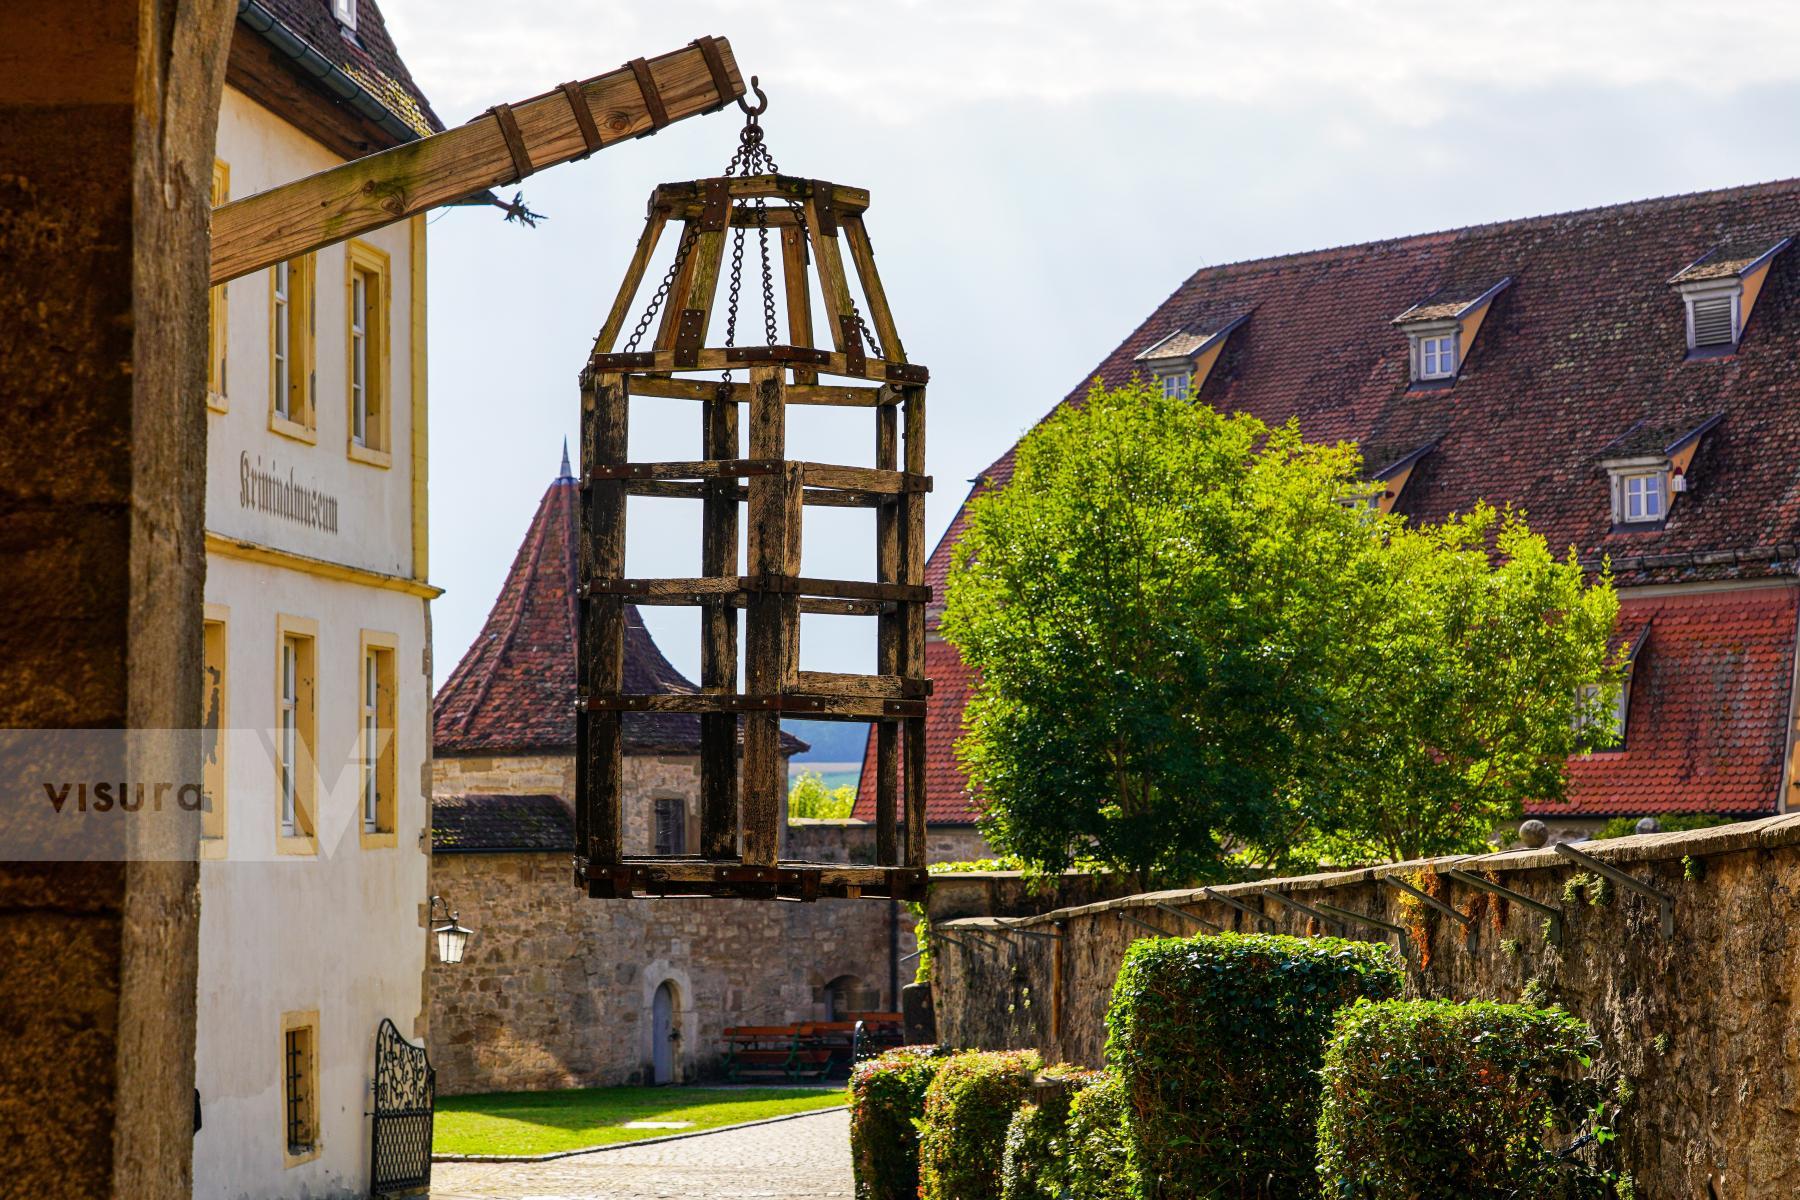 Purchase Medieval Crime Museum in Rothenburg - 16th rank for the top 100 sights in Germany by Michael Nguyen